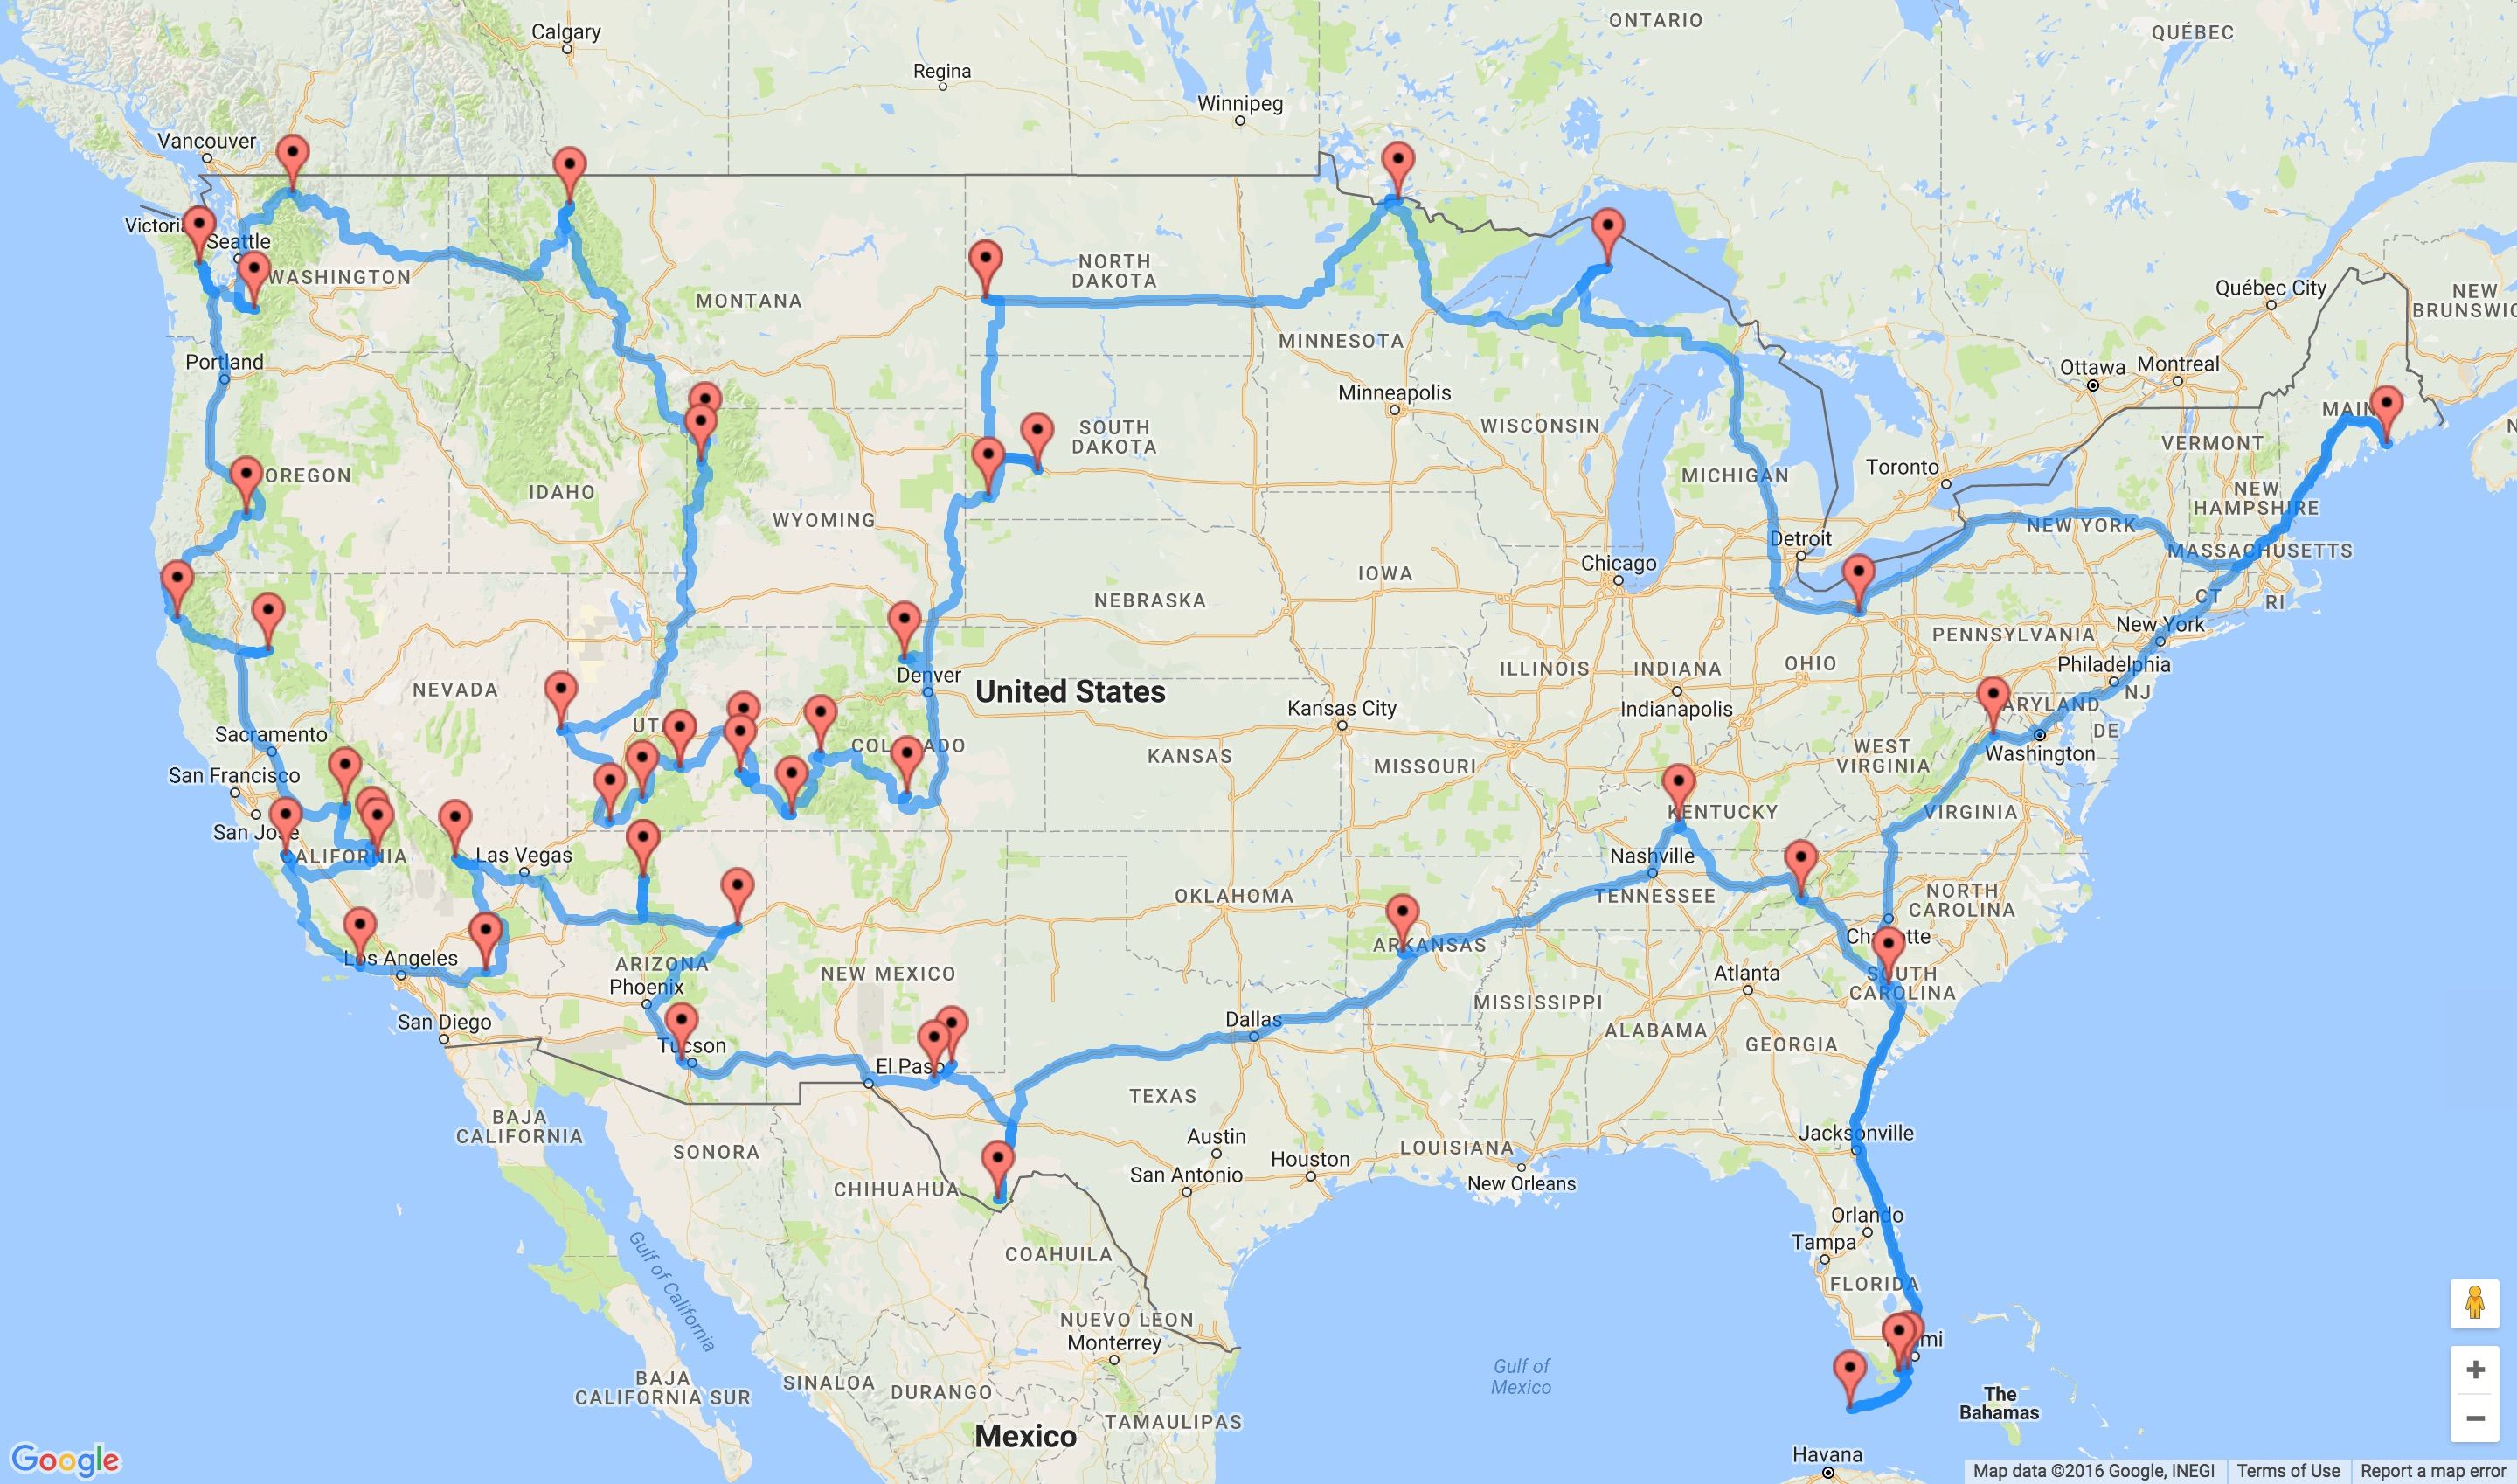 The Best Road Trip Itinerary To See All The Us National Parks